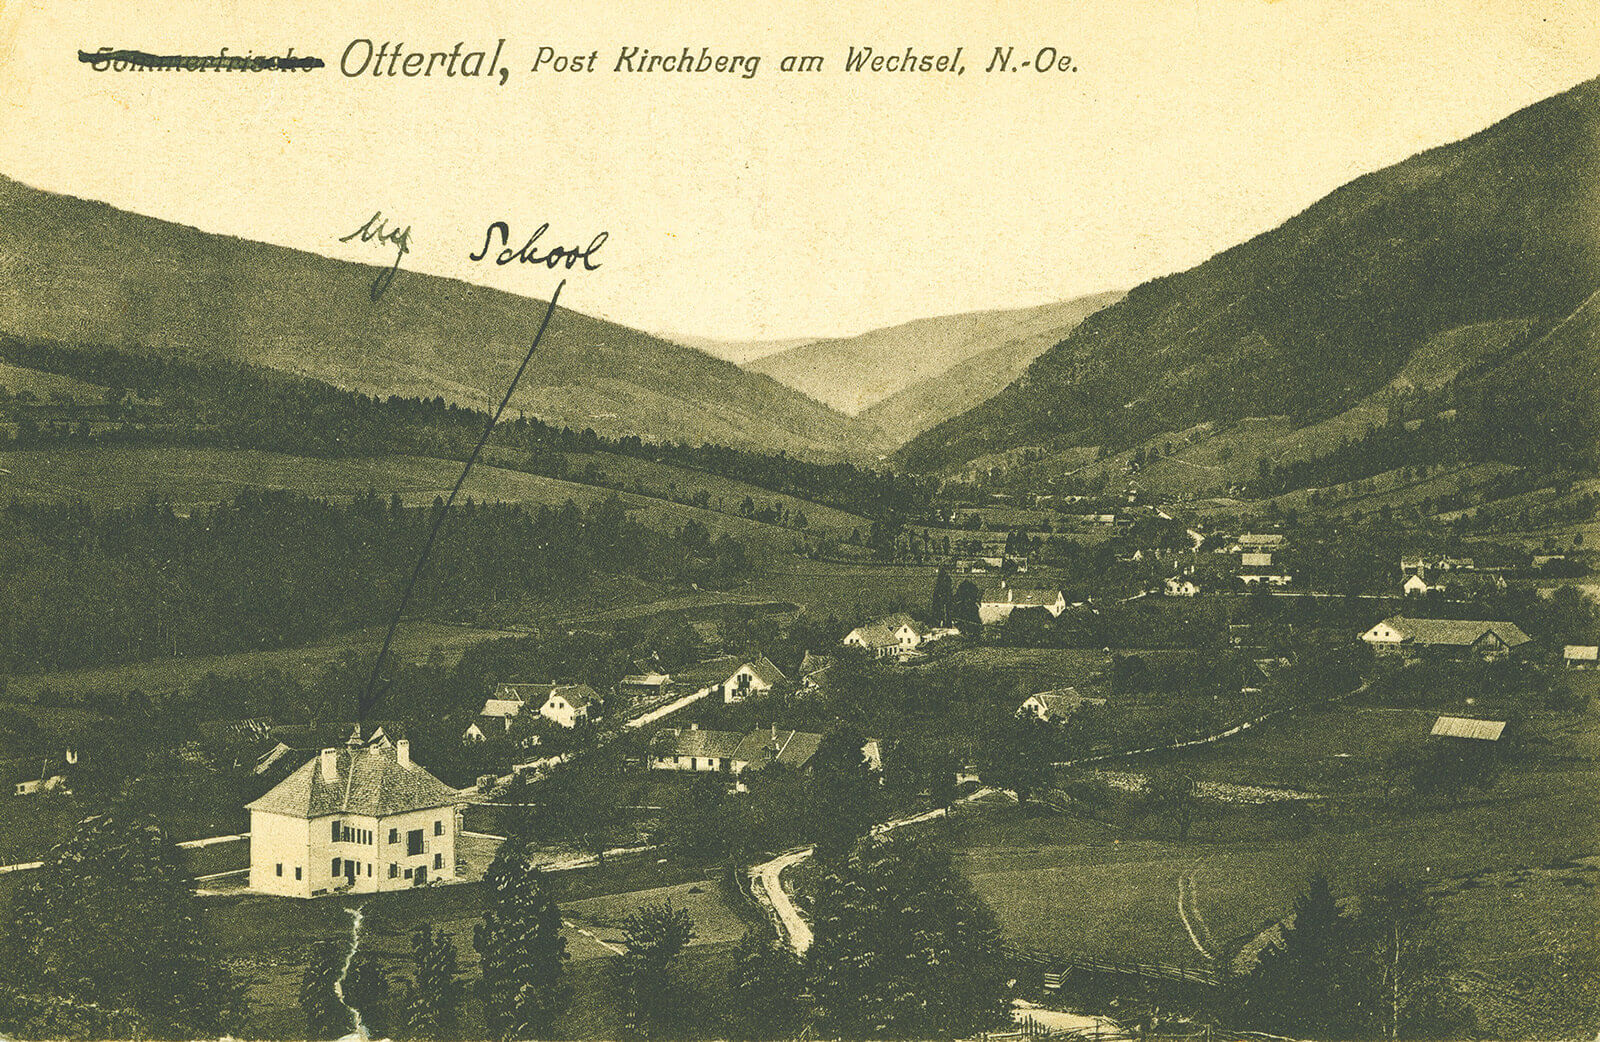 A postcard depicting a photograph of the Austrian village of Otterthal, sent by Ludwig Wittgenstein to William Eccles on the 12th of September nineteen twenty-five. Wittgenstein taught at the school he labels on the postcard from September nineteen twenty-four until April nineteen twenty-six, when knocking a boy unconscious brought his school teaching career to an end.